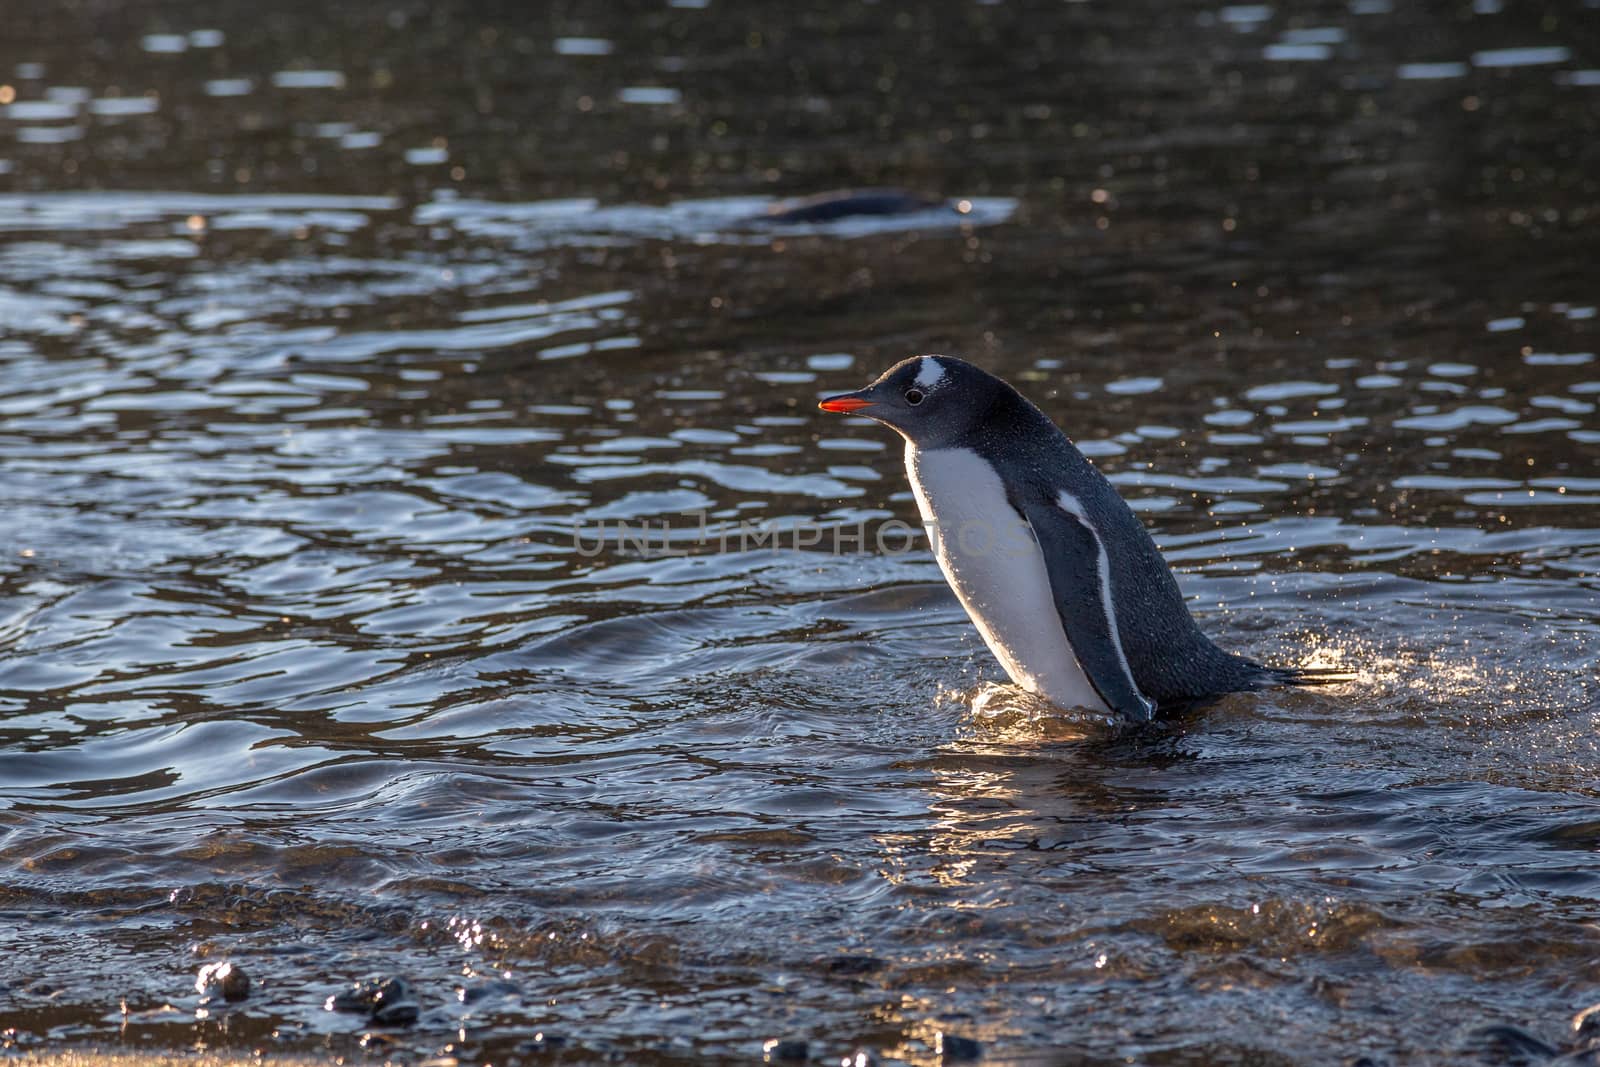 Wet gentoo penguin swimming in ocean water at the Barrientos Isl by ambeon